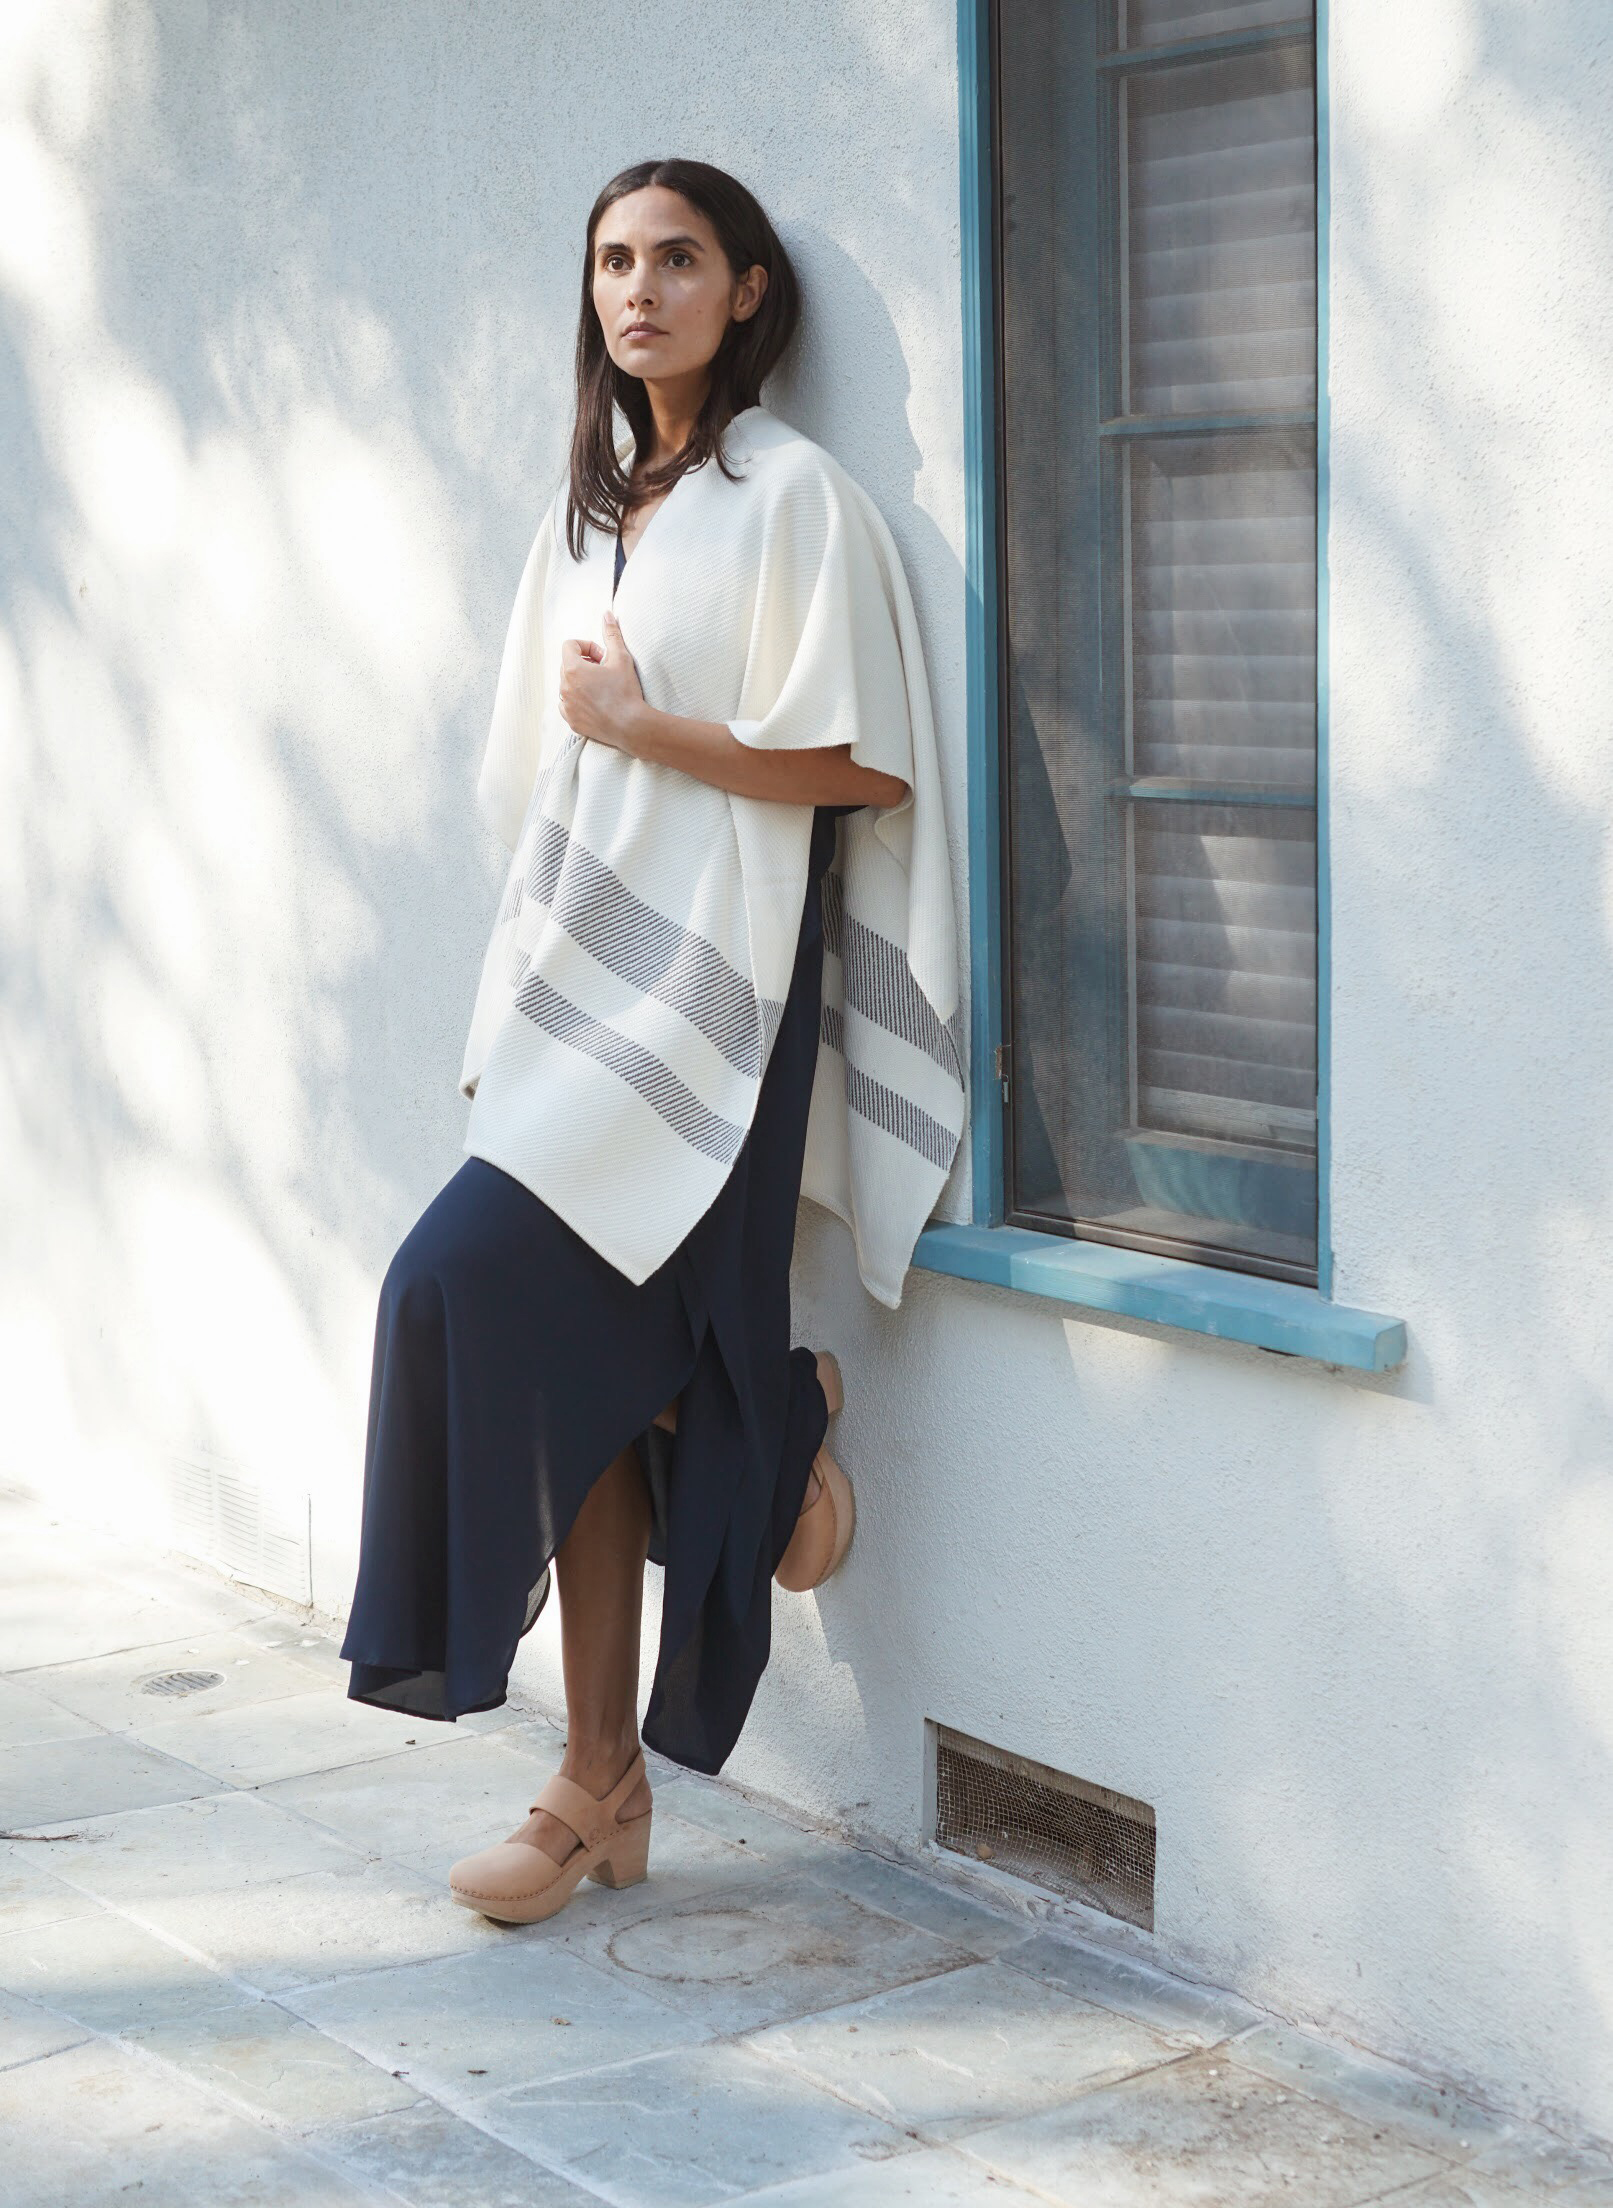   Maiyet  Stripe Hem Poncho in Ivory +  Raven &amp; Lily  Fiza Dress in Navy +   Zuzii   Close Toe Clogs in Natural. 